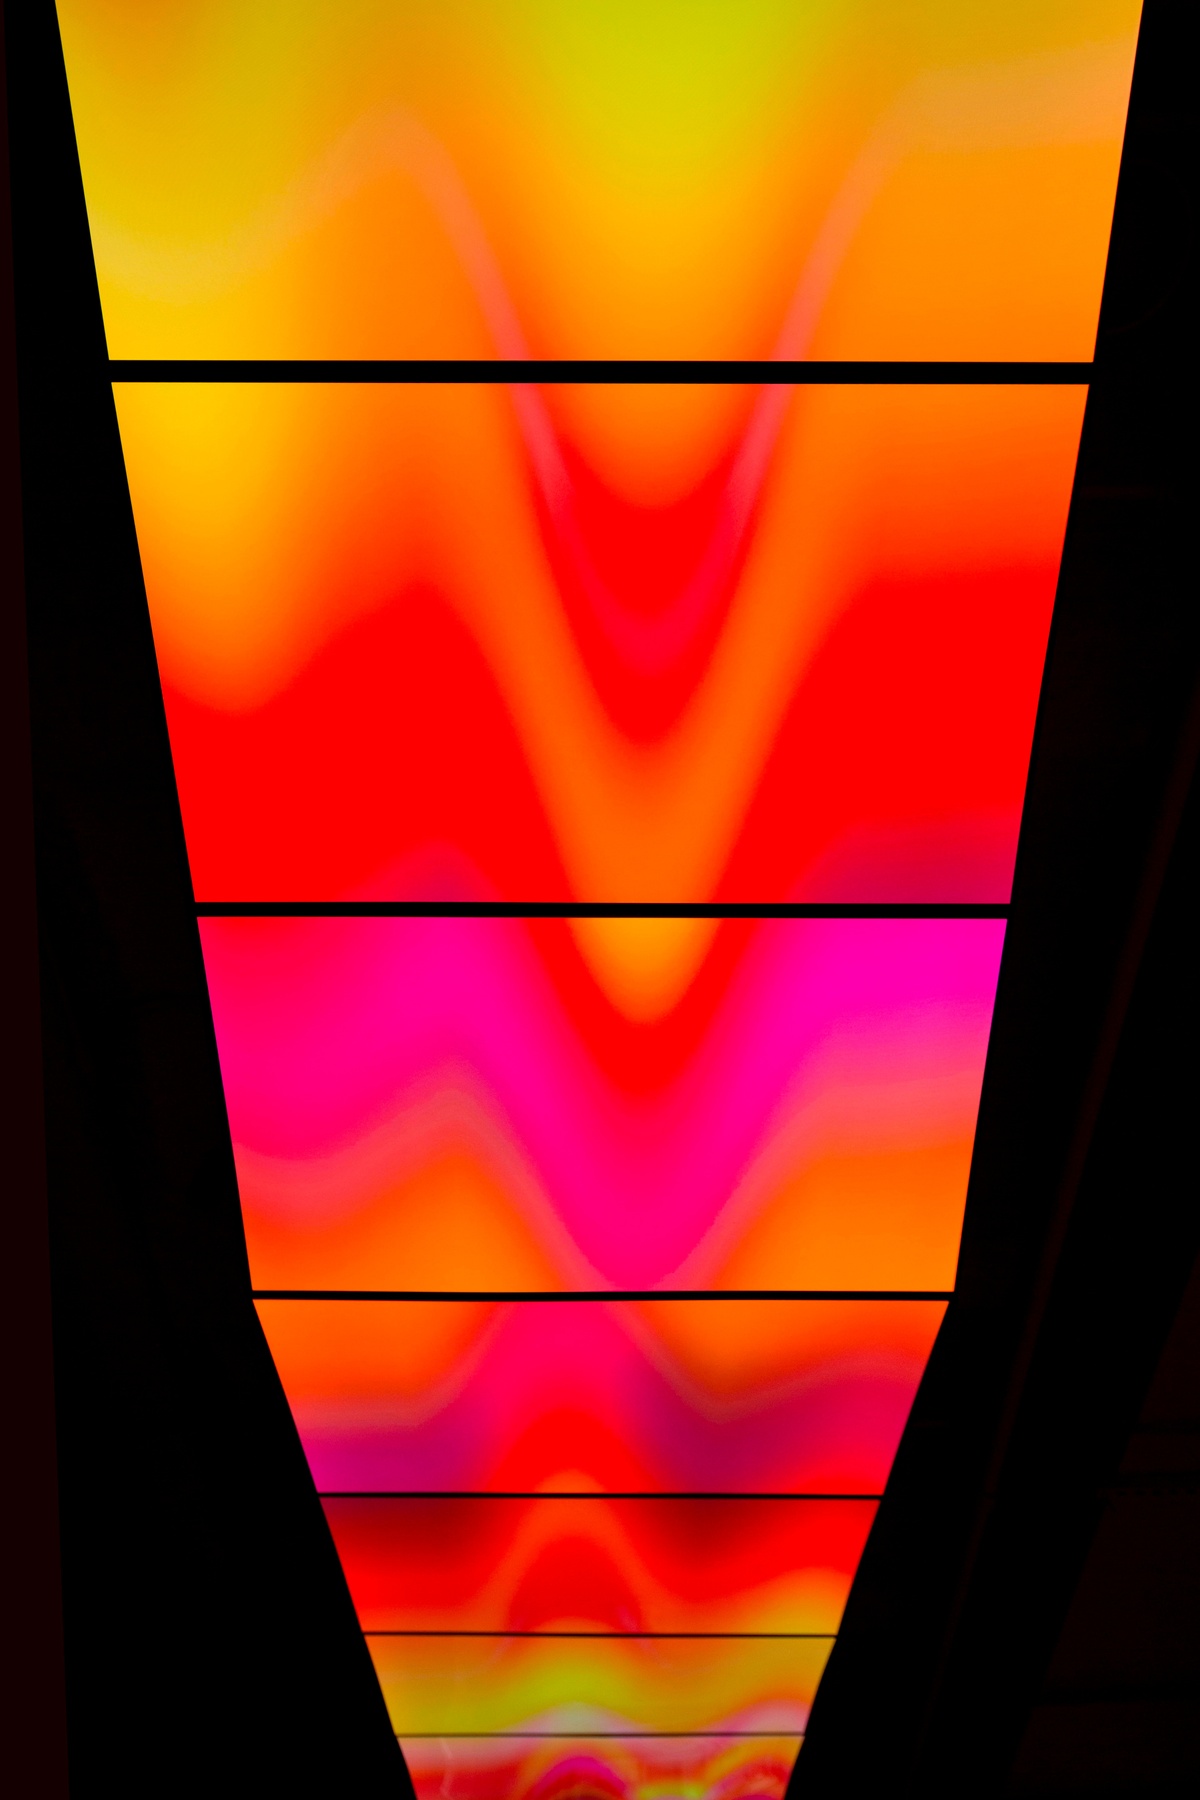 The Skywalk with its dynamic colors of yellow, red and orange gradient